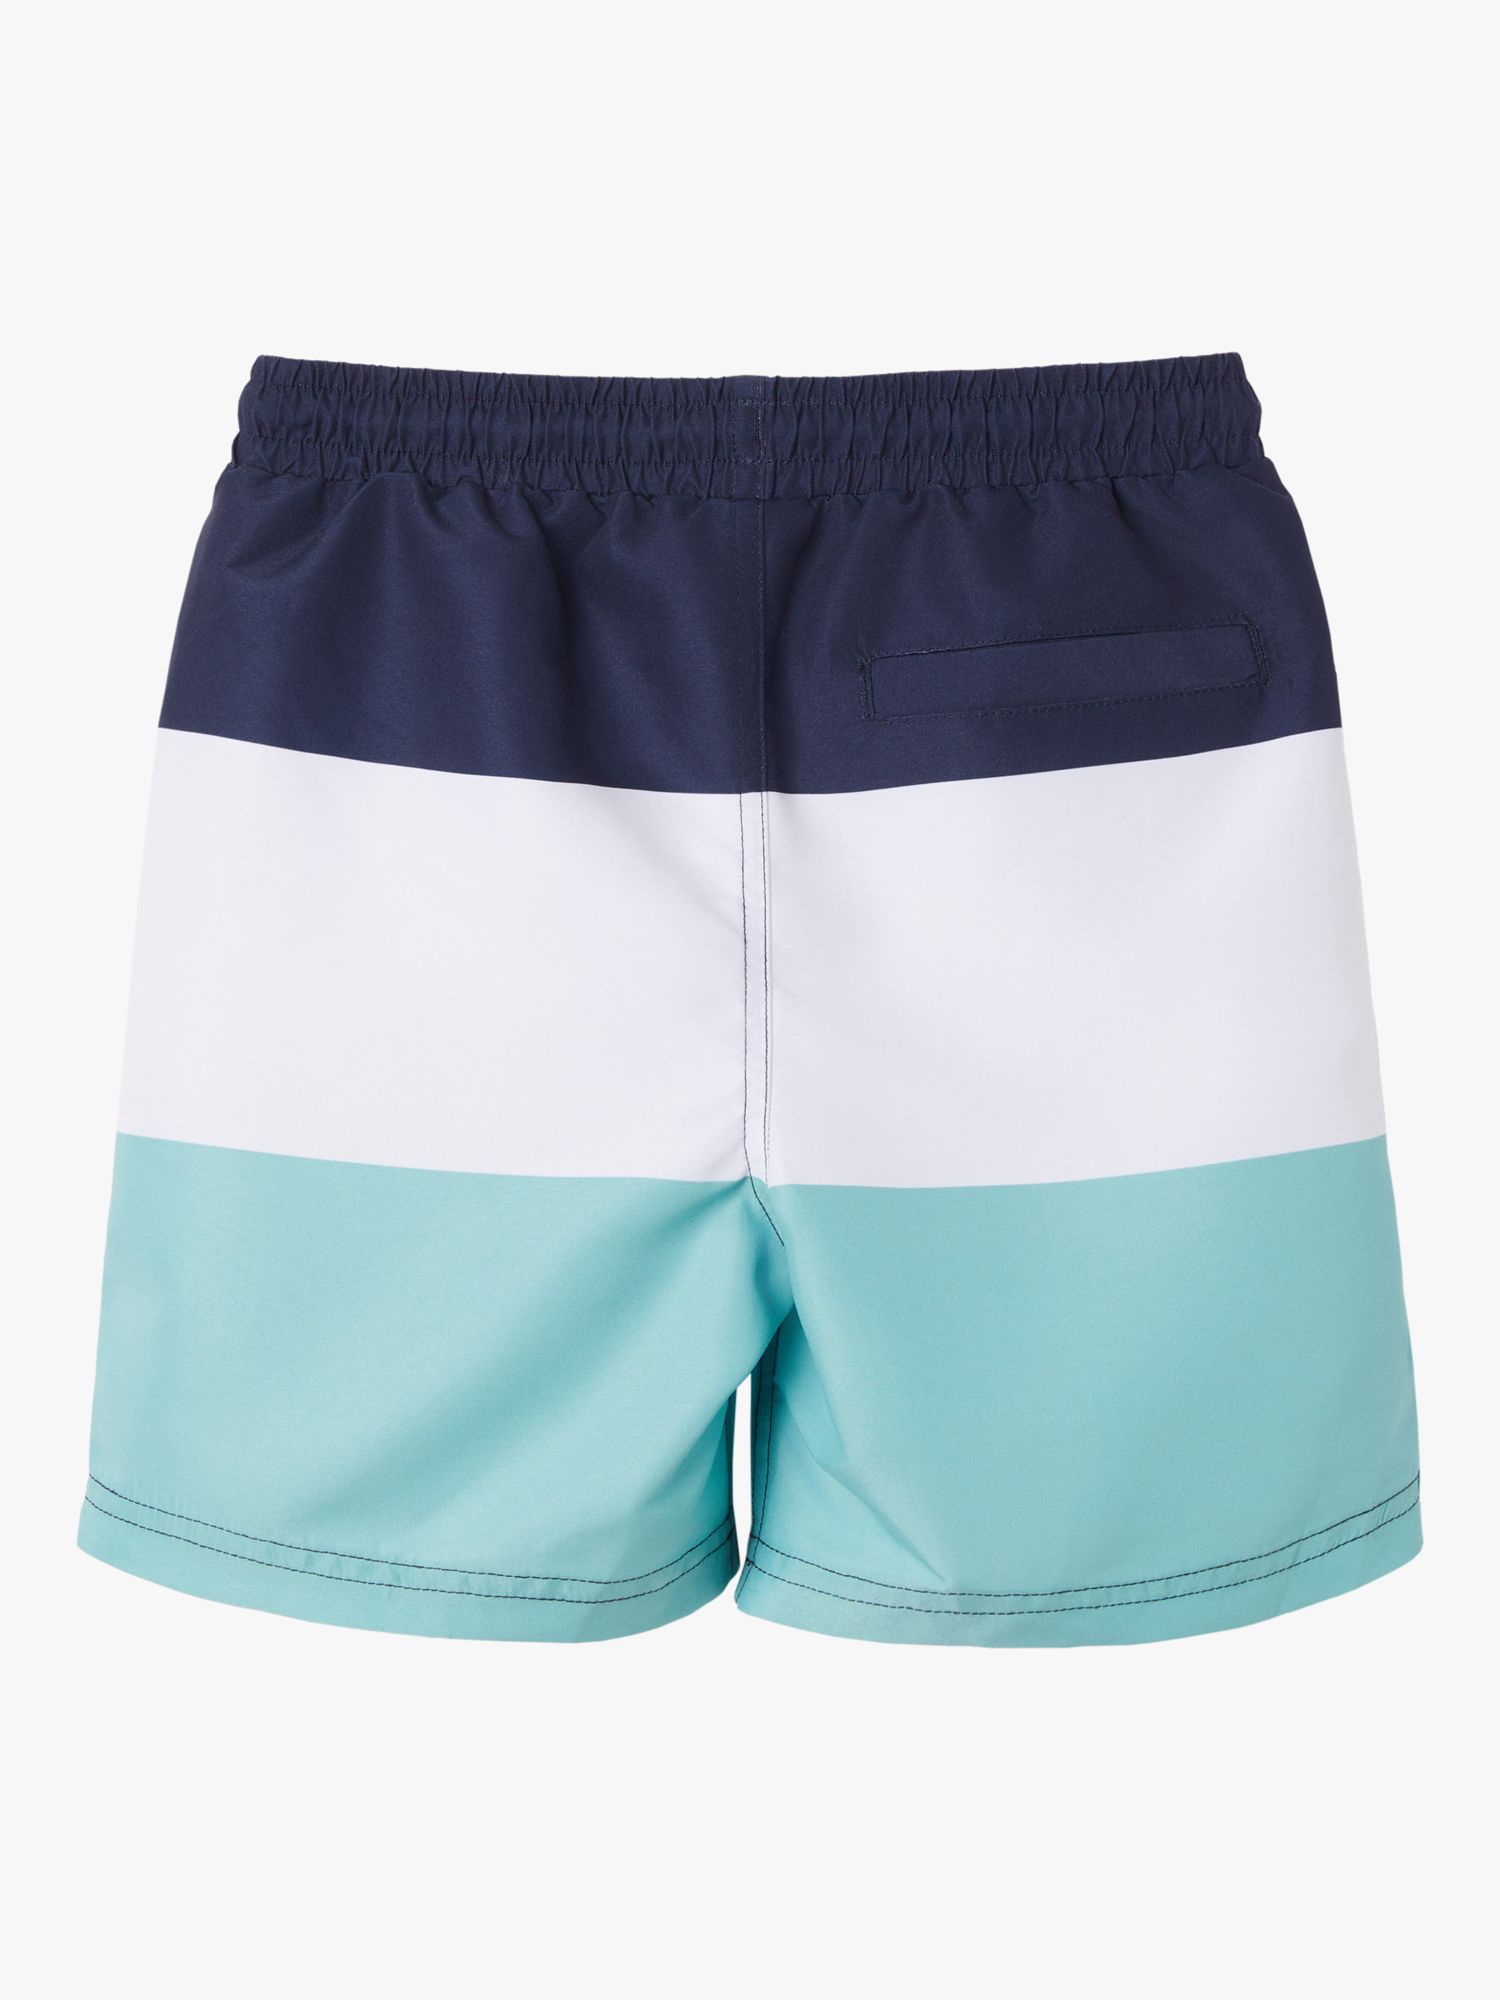 Polarn O. Pyret Kids' Recycled Colour Block Swim Shorts, Blue, 1-2 years